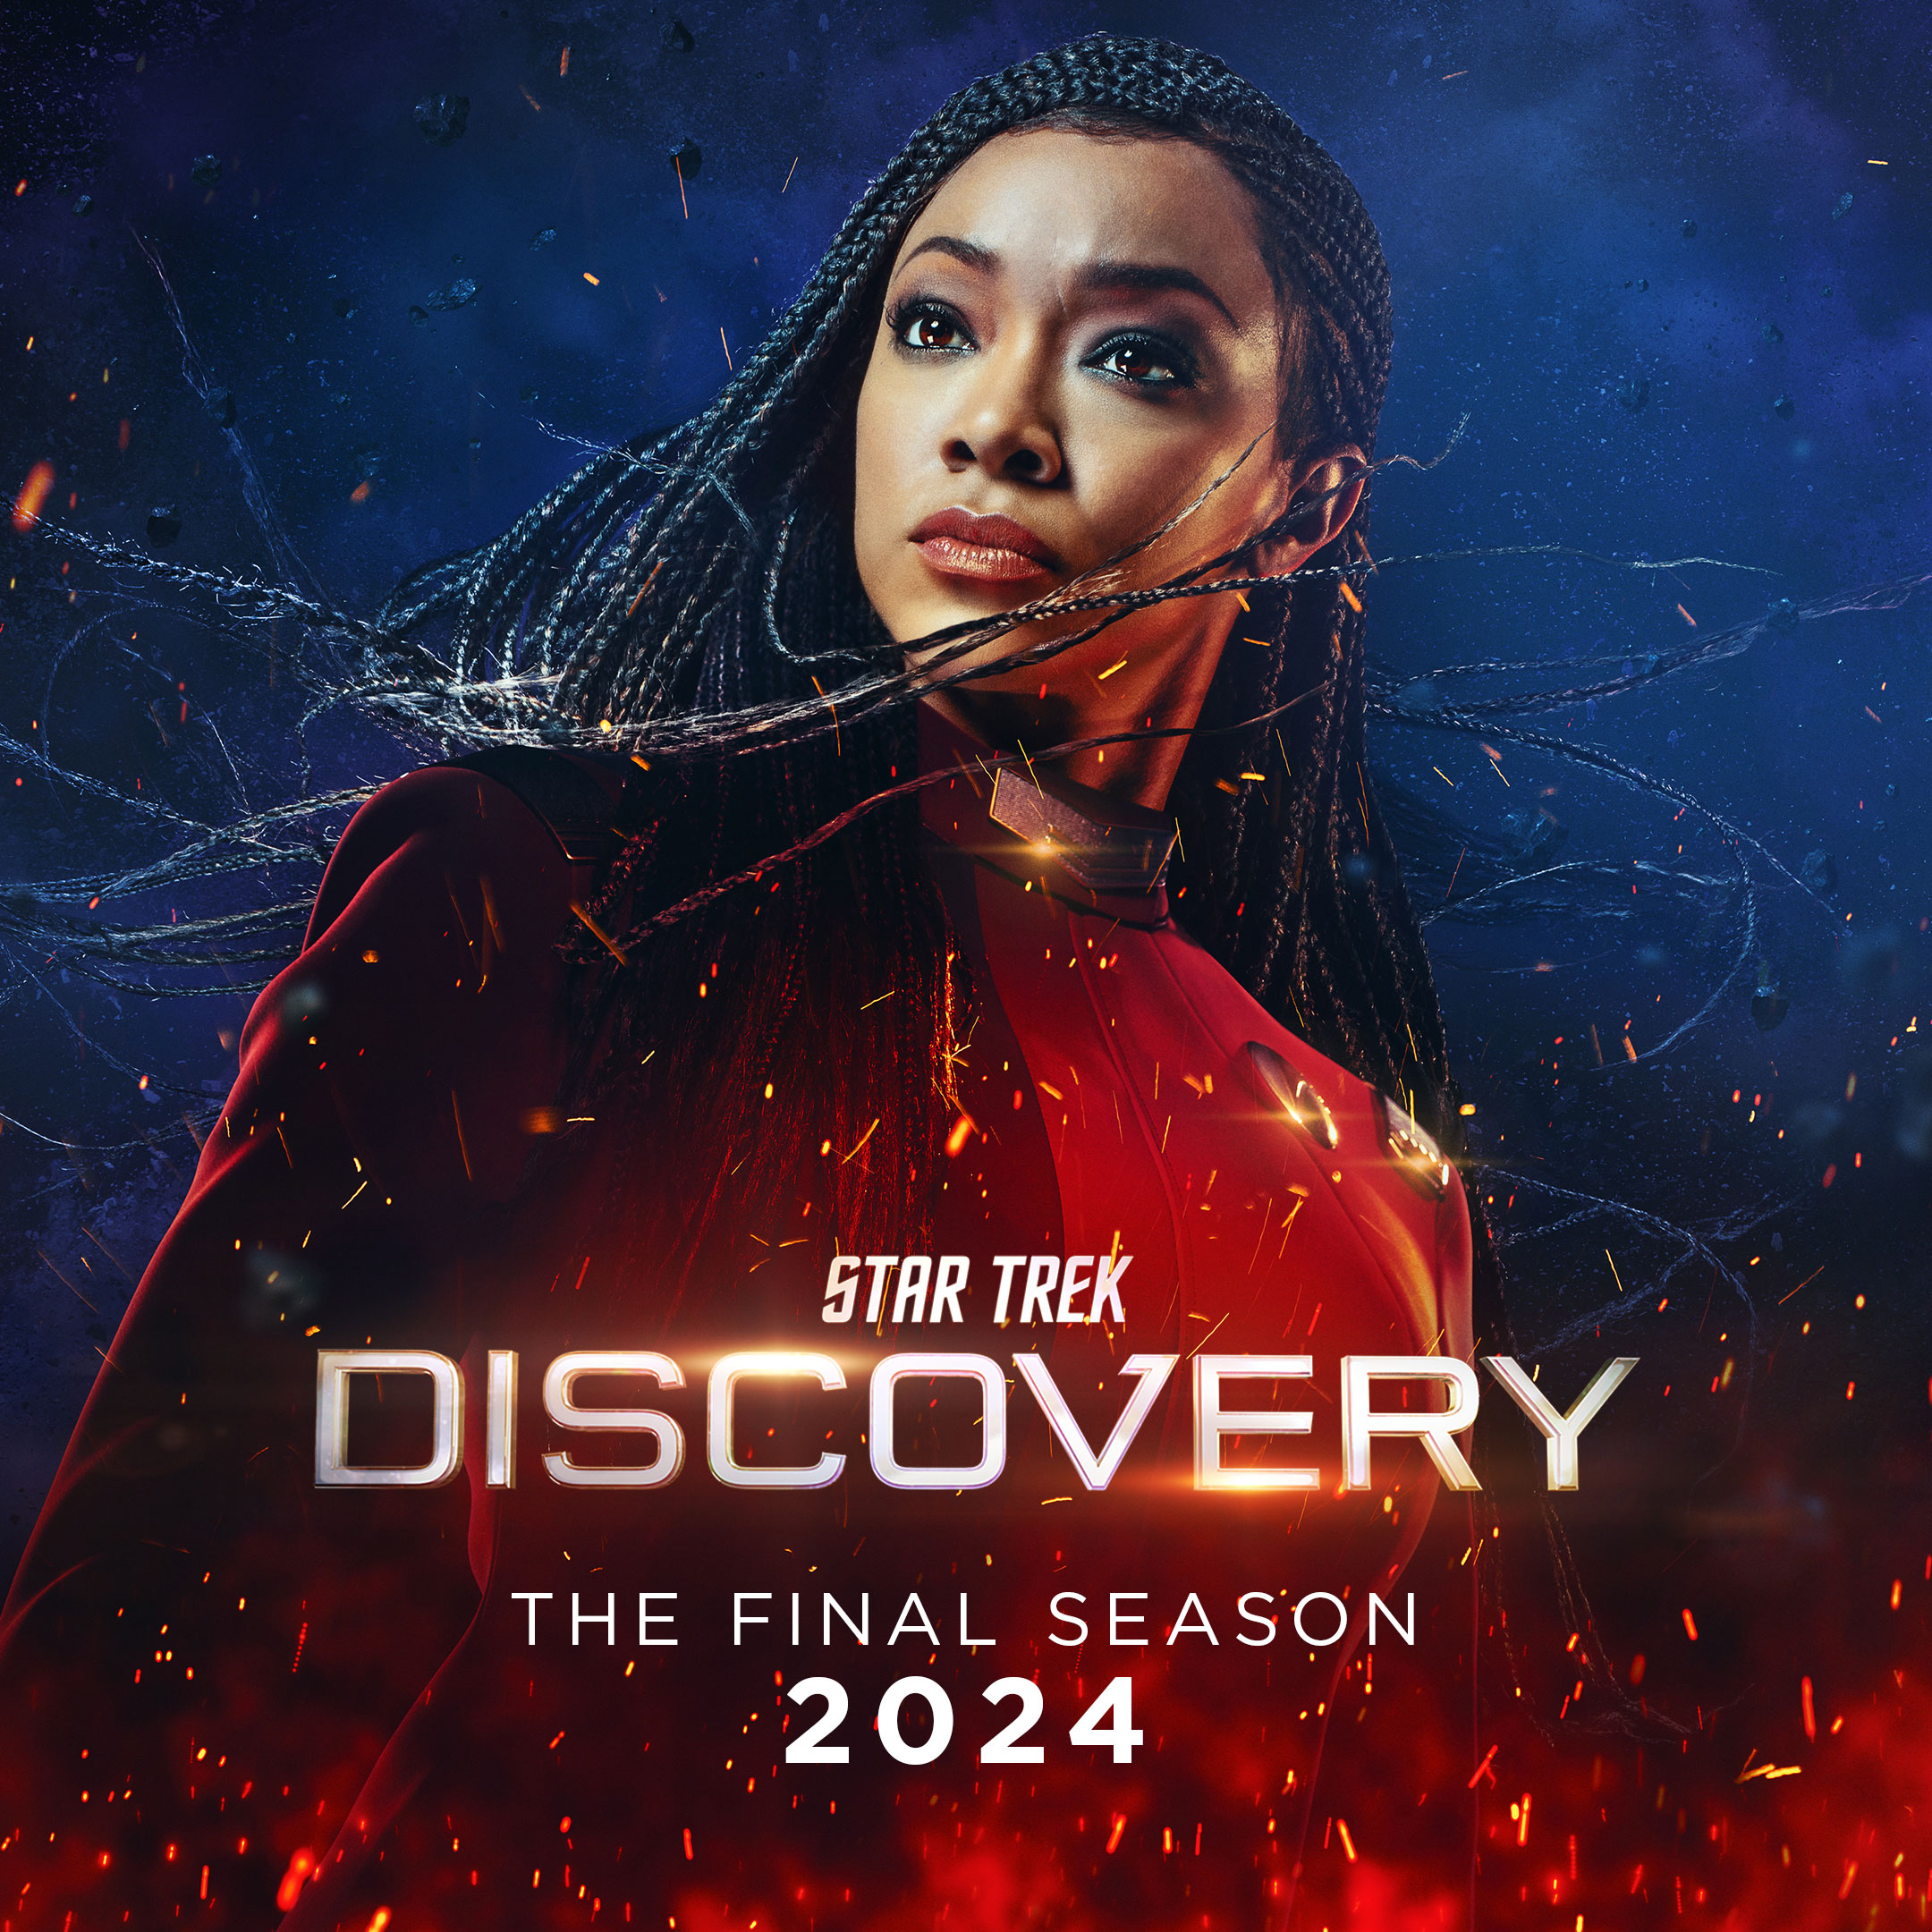 Star Trek: Discovery season 5 graphic posted on Twitter by @StarTrek